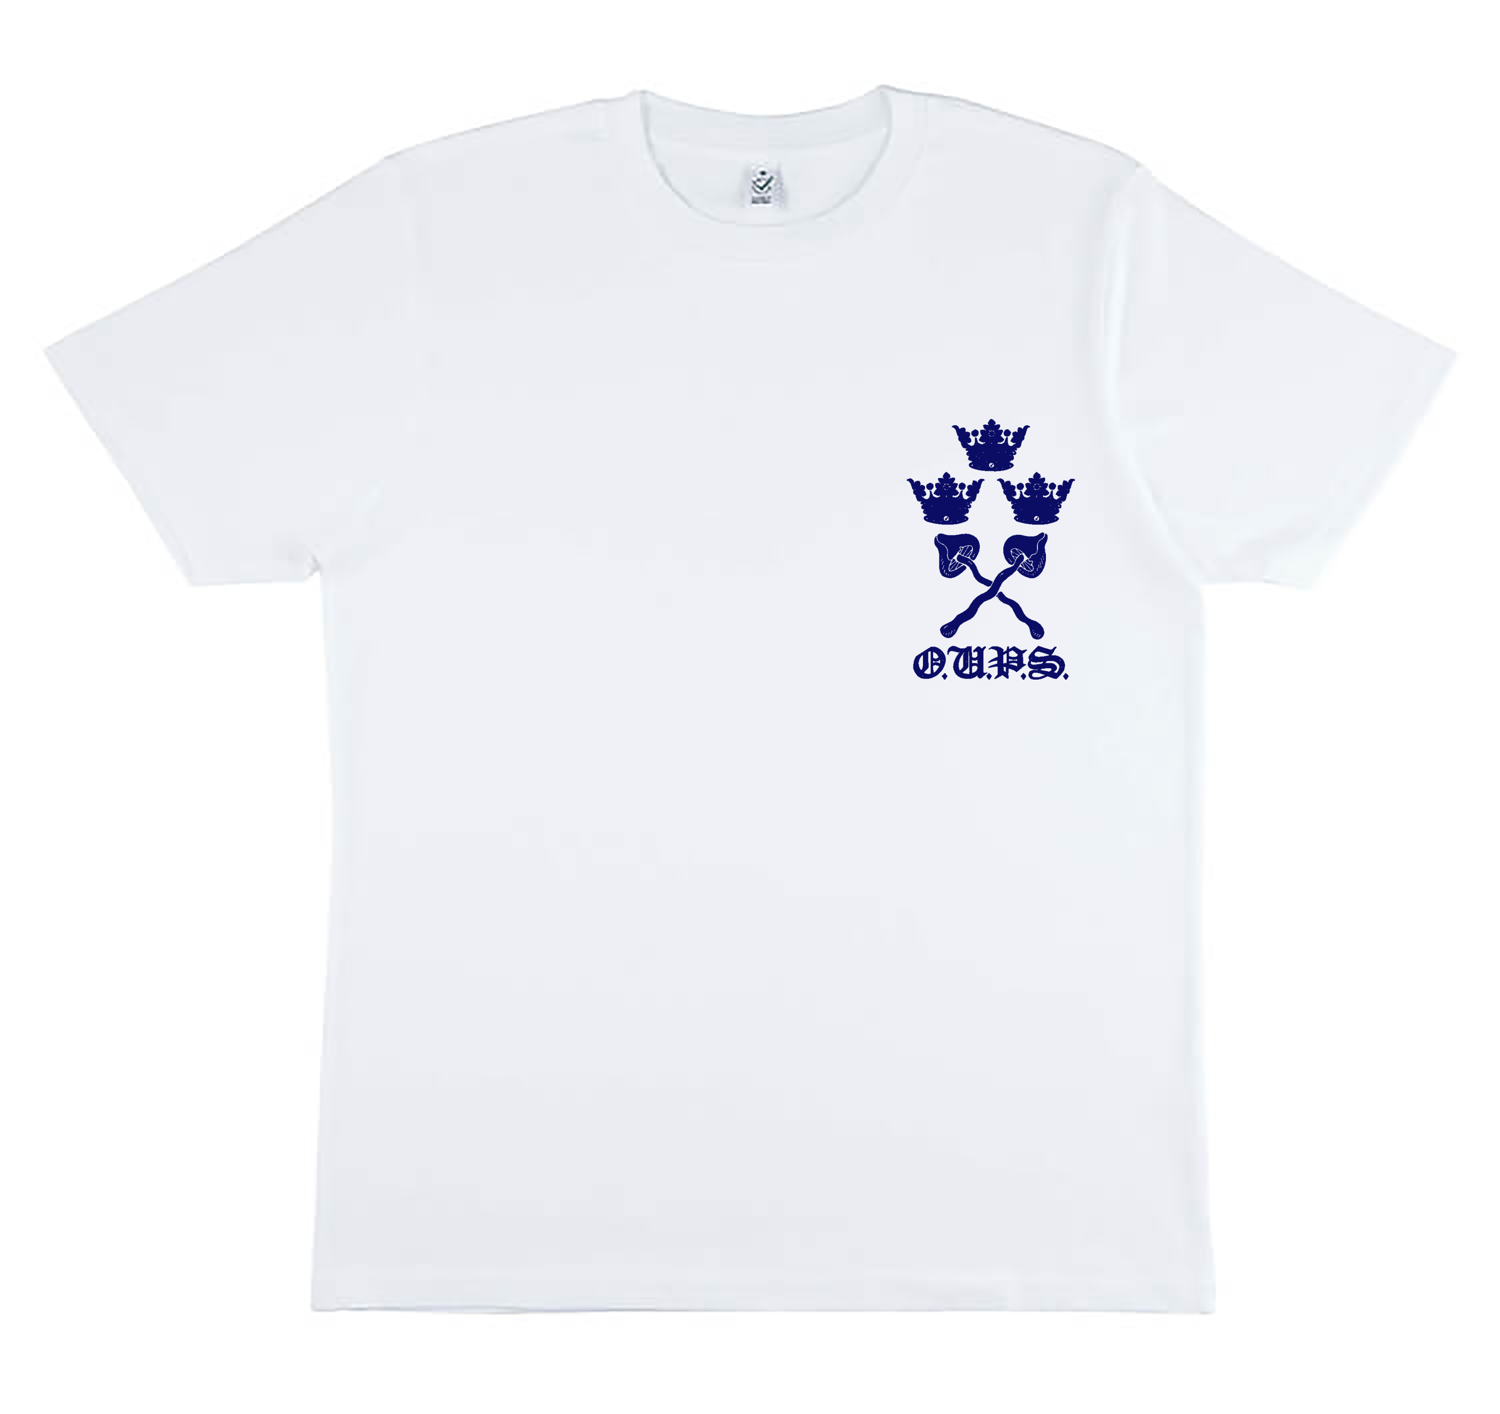 Image of Pre-order freshers varsity unisex classic jersey t-shirt white (certified organic cotton)